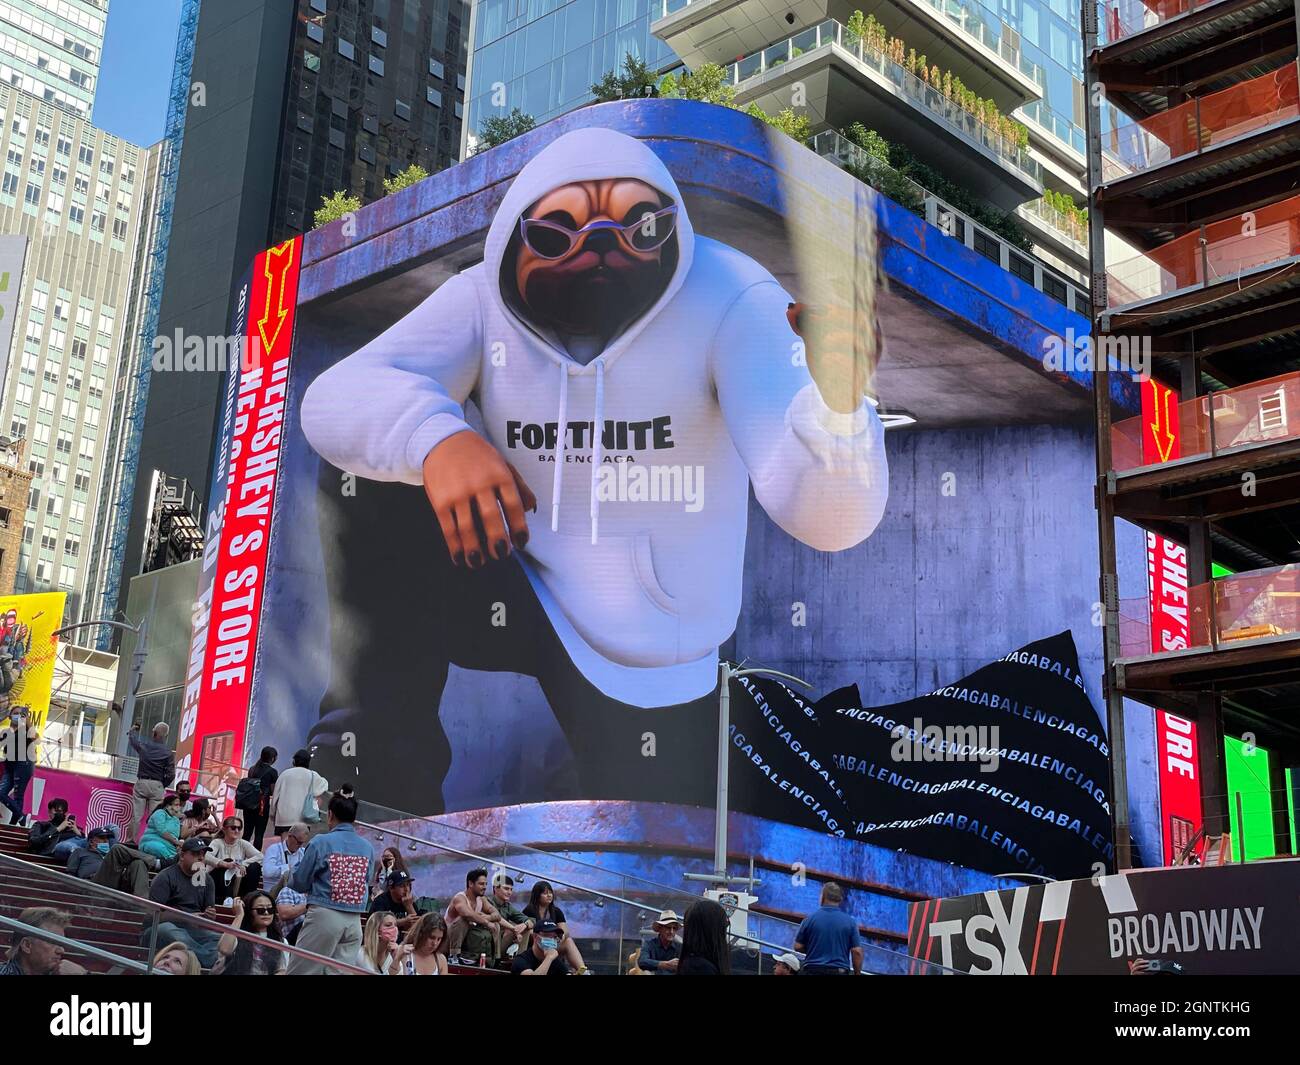 New York NY Sept 27: Balenciaga's 3D Fortnite billboard in Times Square NYC  Credit: Rainmaker/MediaPunch Stock Photo - Alamy